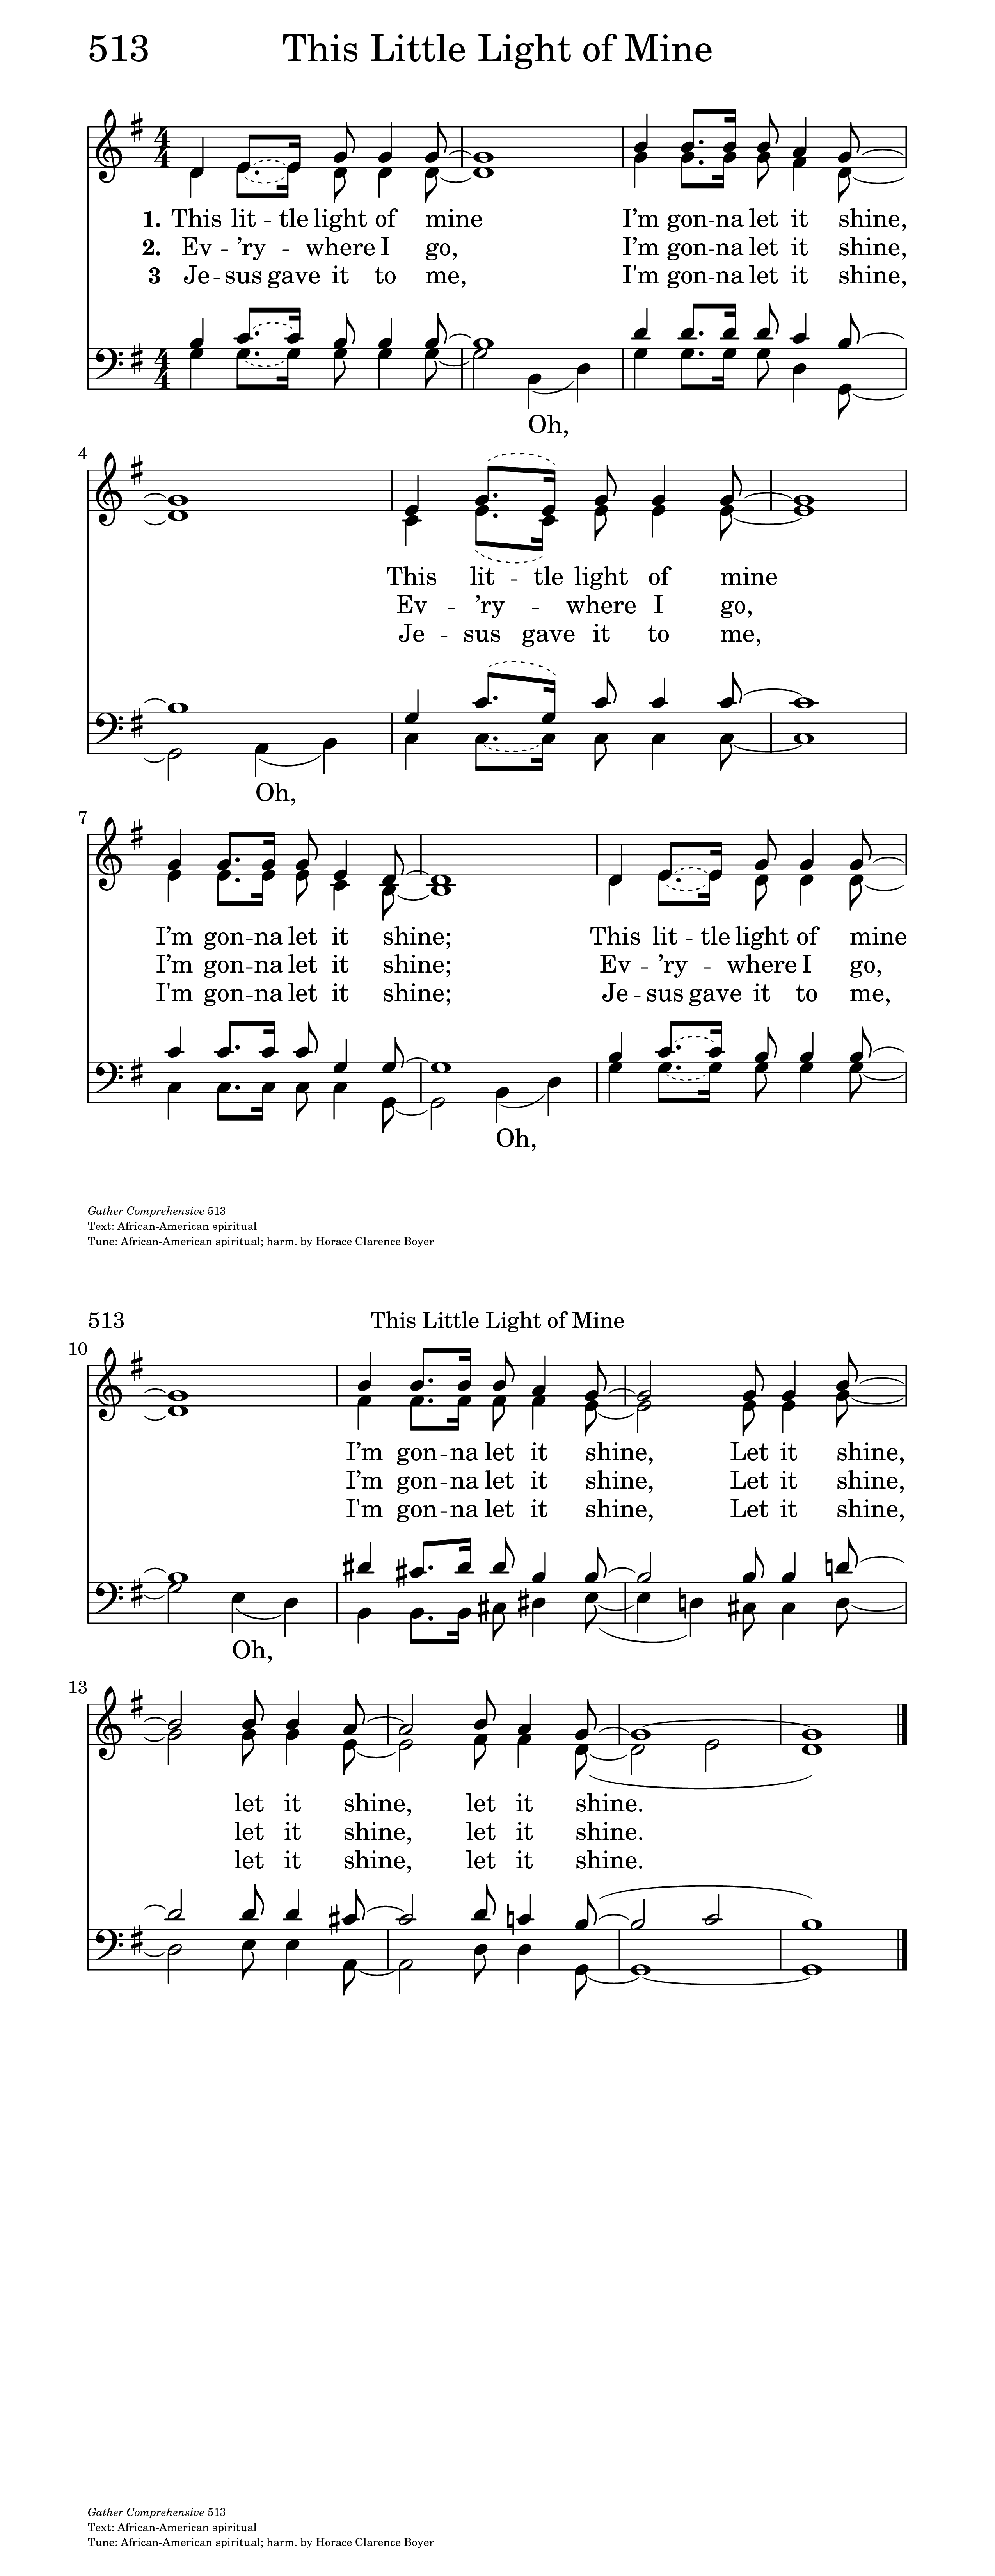 This Little Light of Mine | Hymnary.org